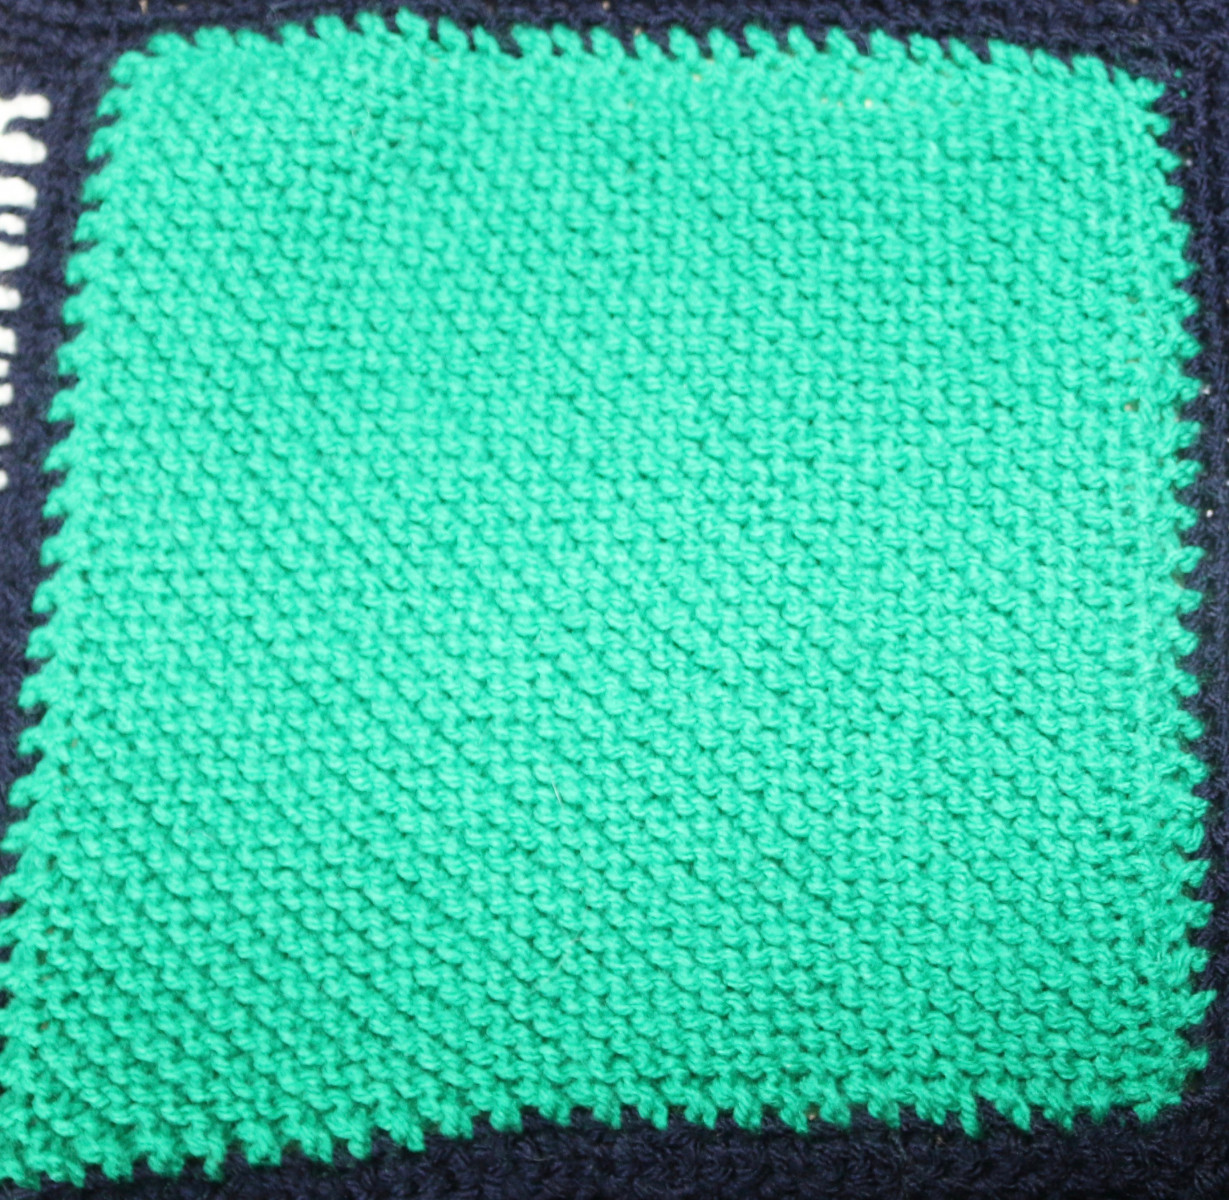 Green knitted square